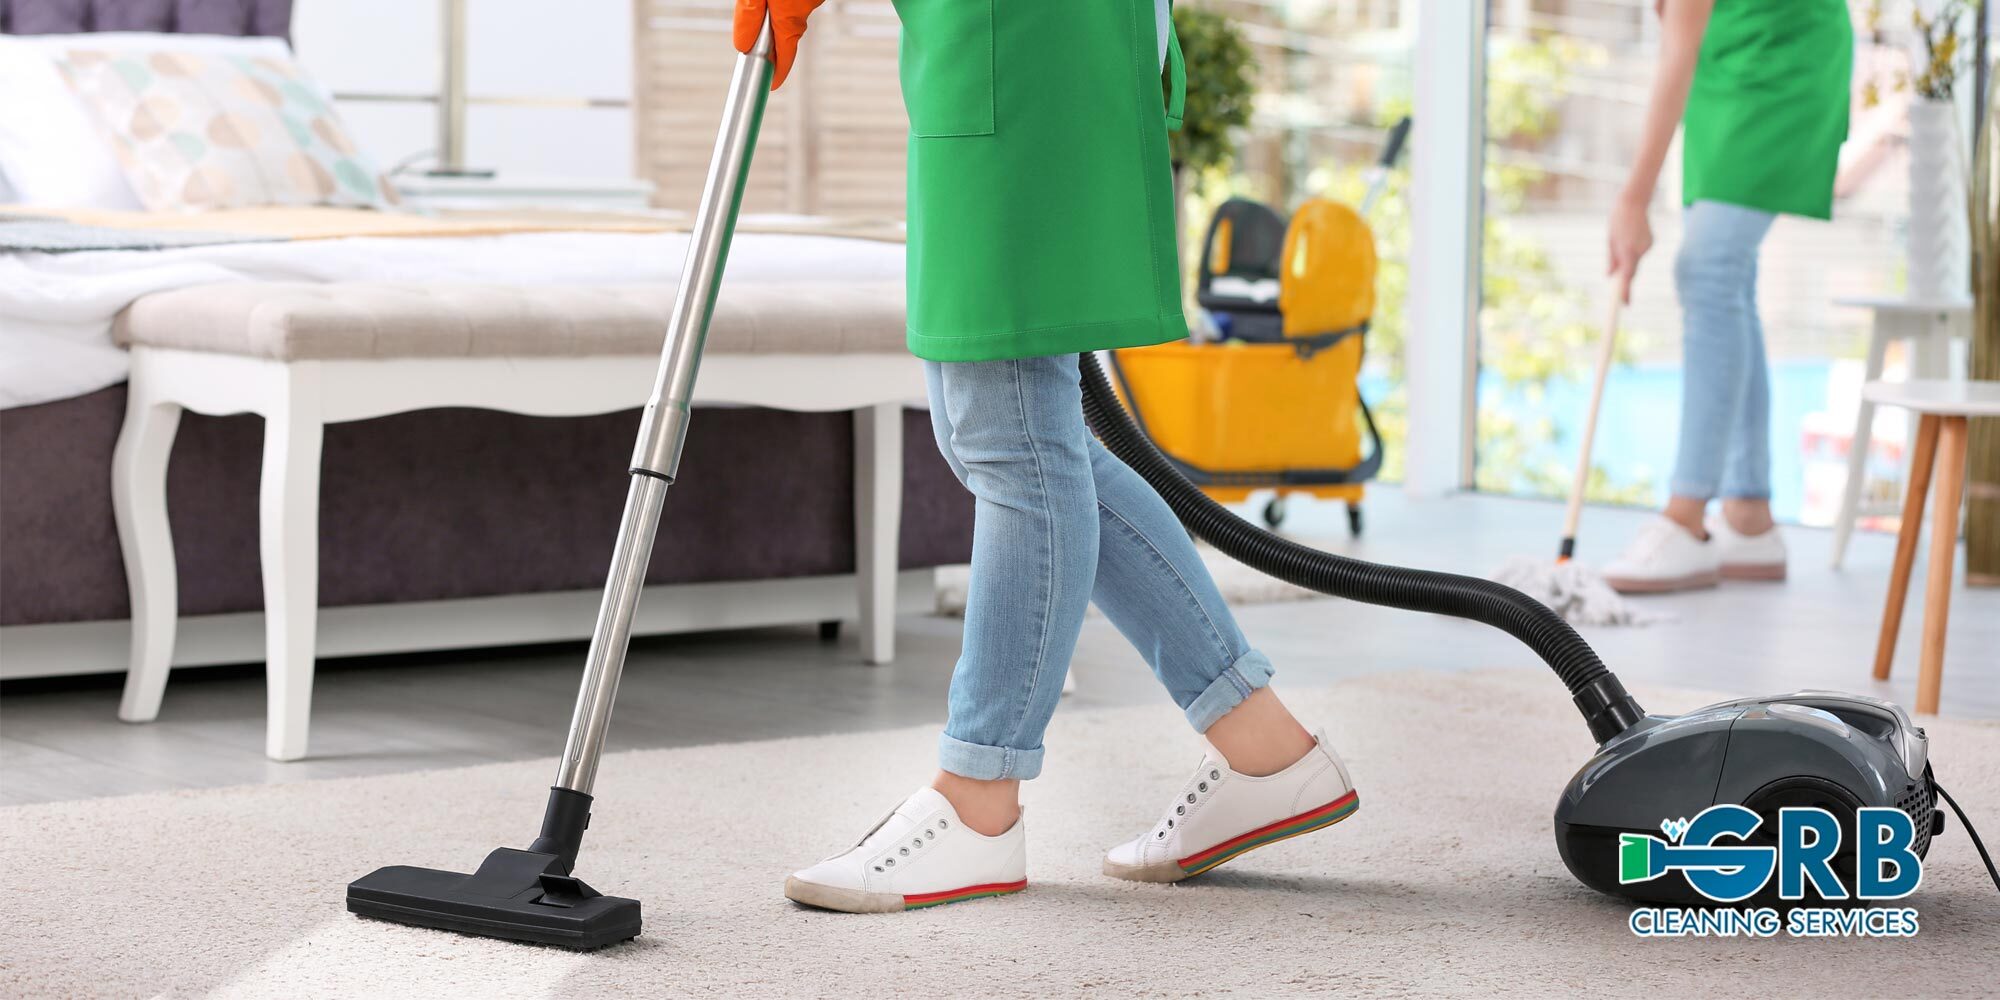 Bedroom Cleaning Services - GRB Cleaning Services